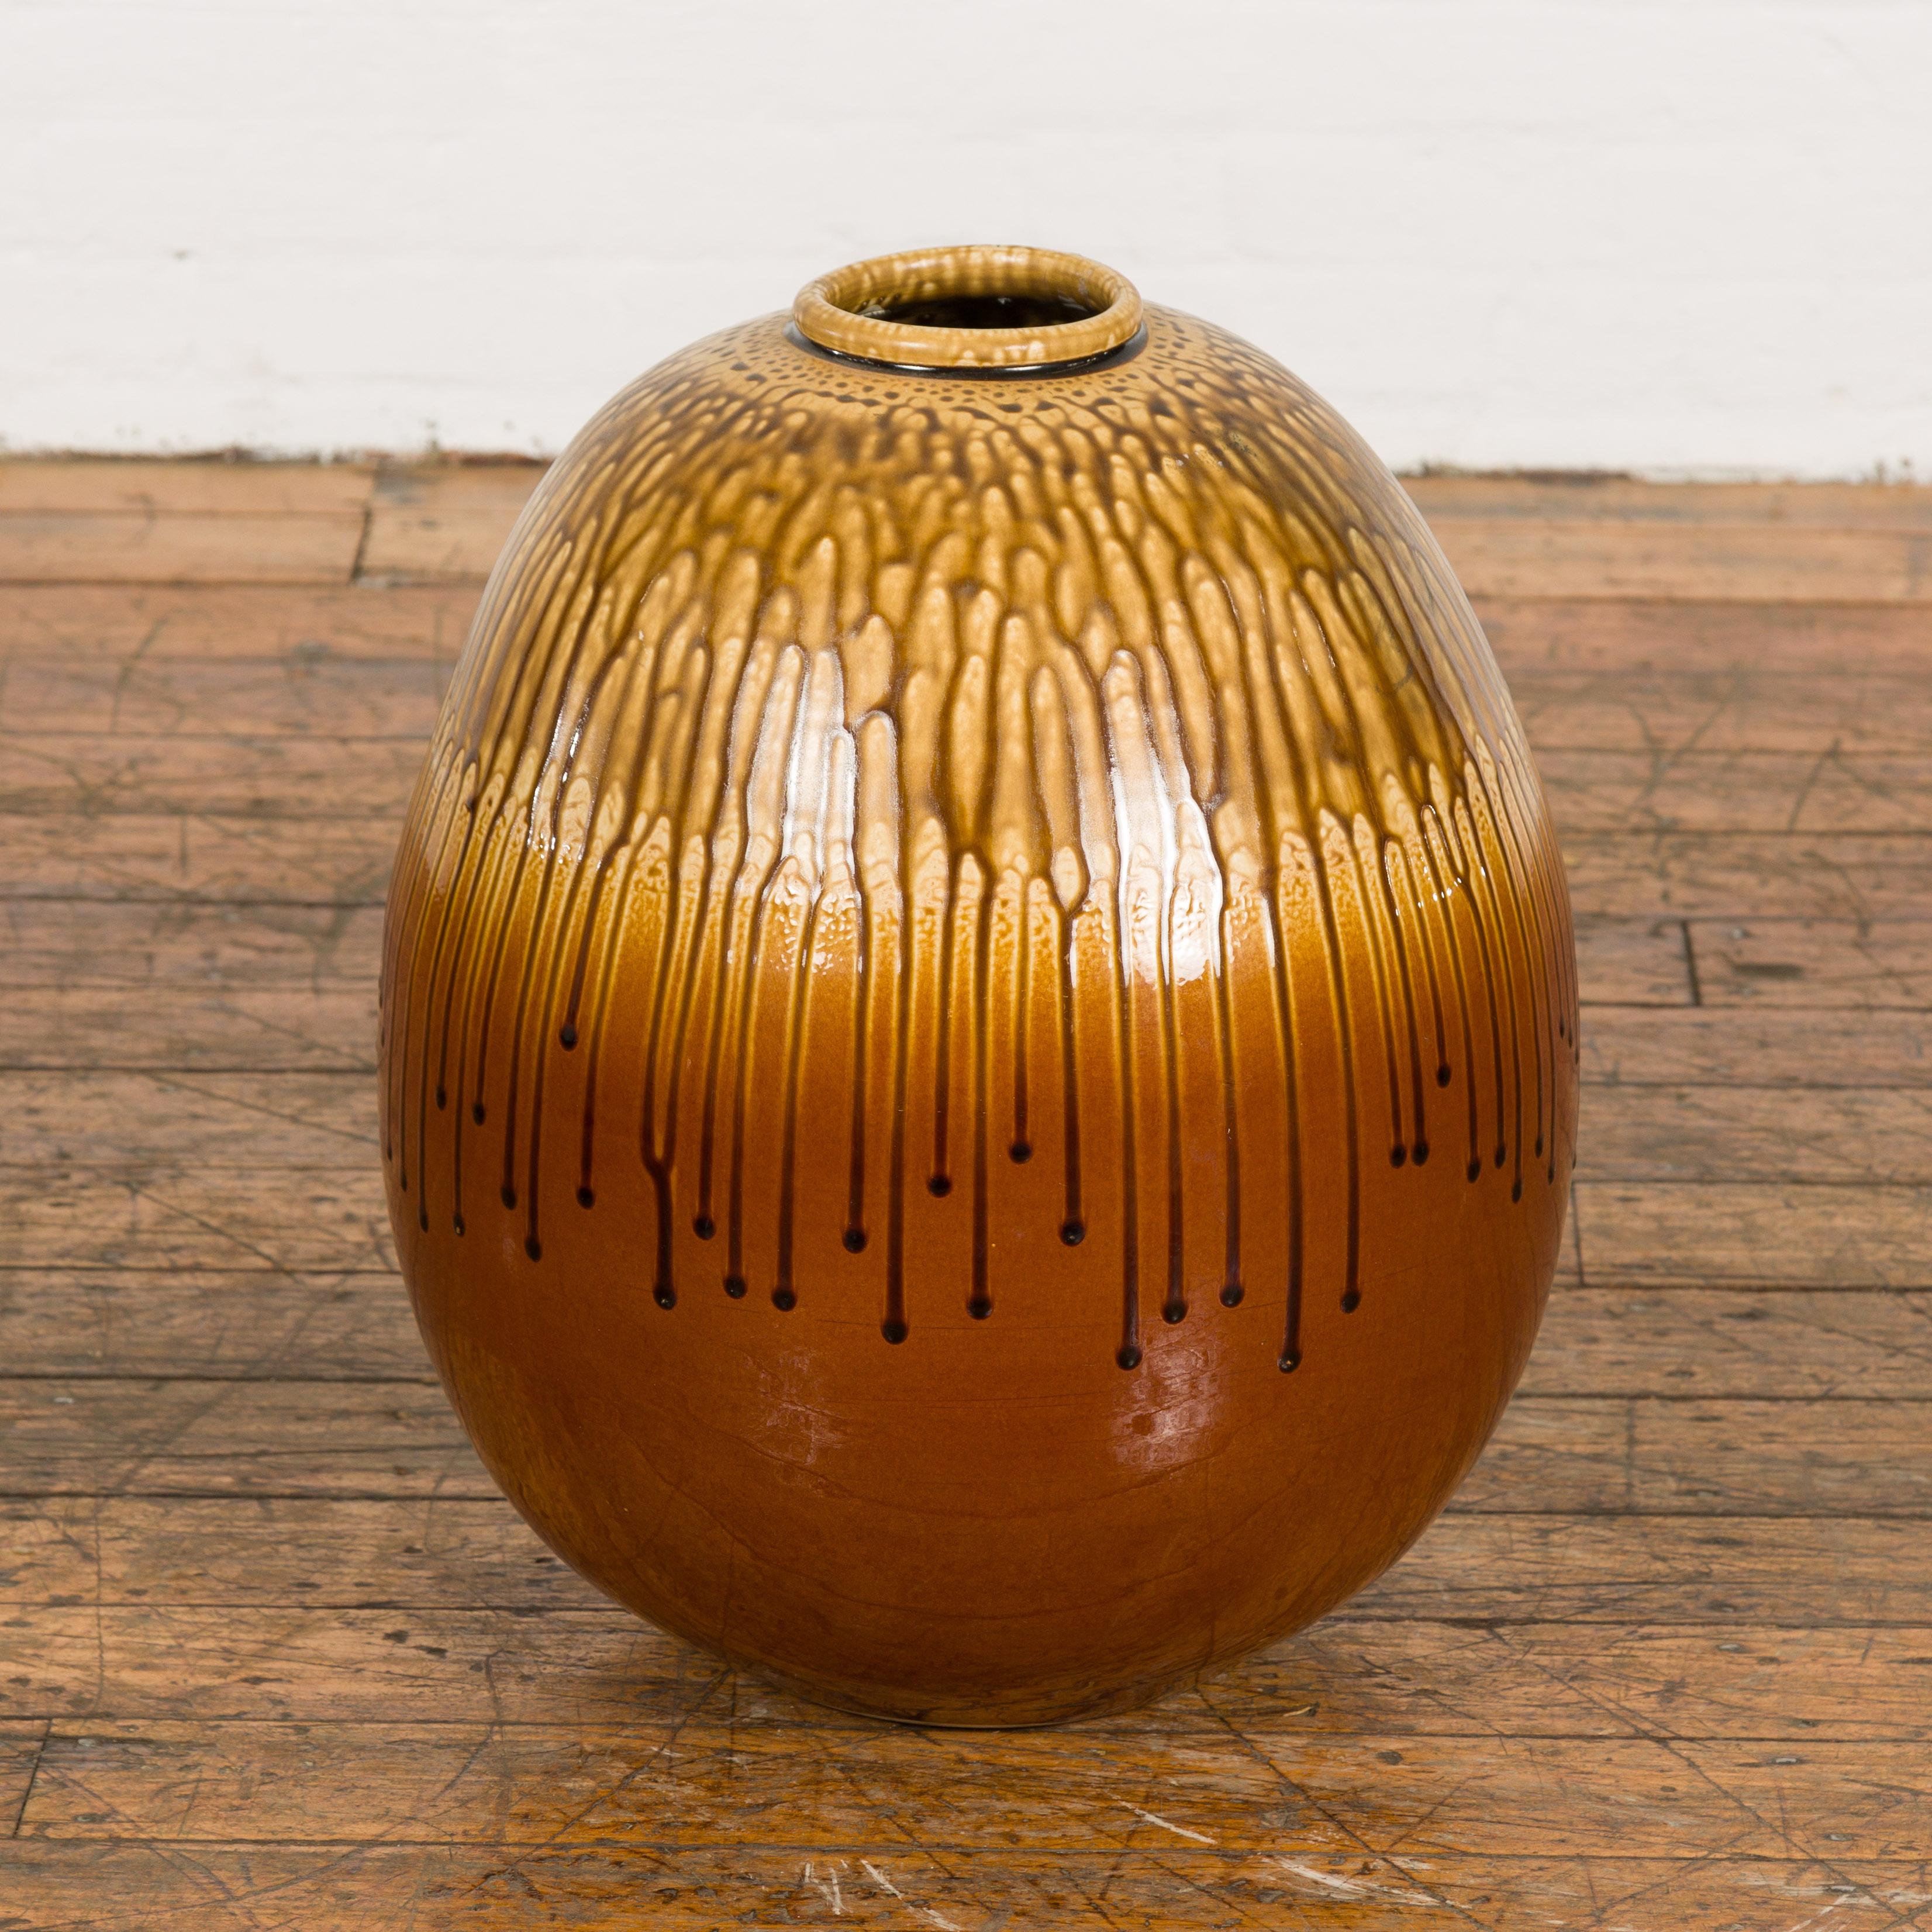 Round Brown and Yellow Ceramic Vase with Drip Design In Excellent Condition For Sale In Yonkers, NY